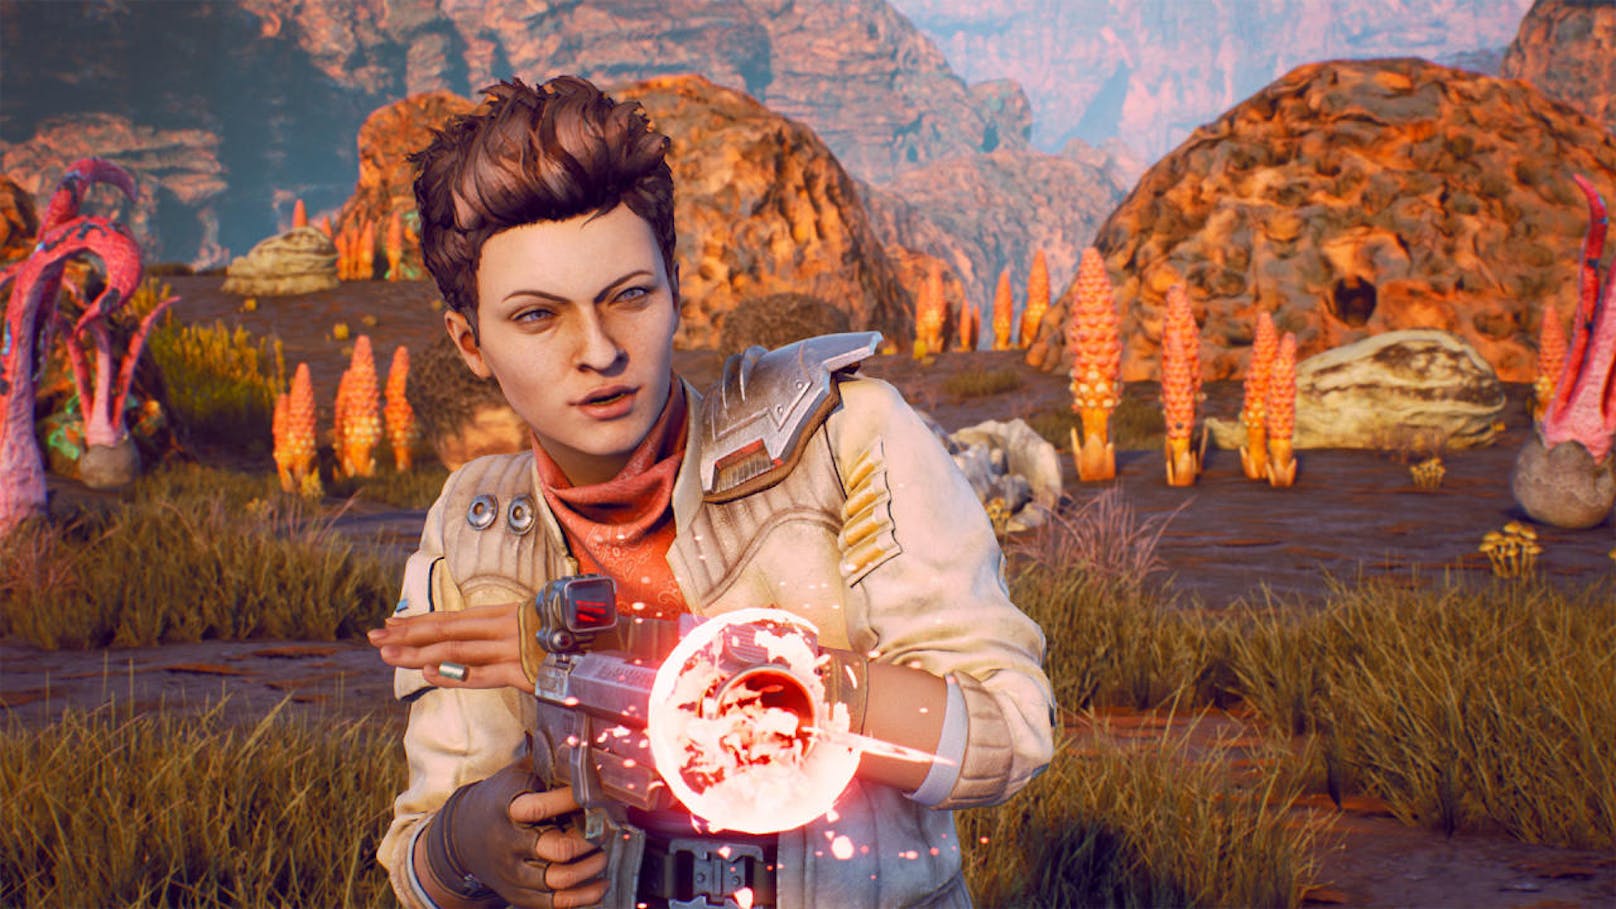  <a href="https://www.heute.at/s/-the-outer-worlds-im-test-genial-abgehoben-45830924" target="_blank">The Outer Worlds</a>